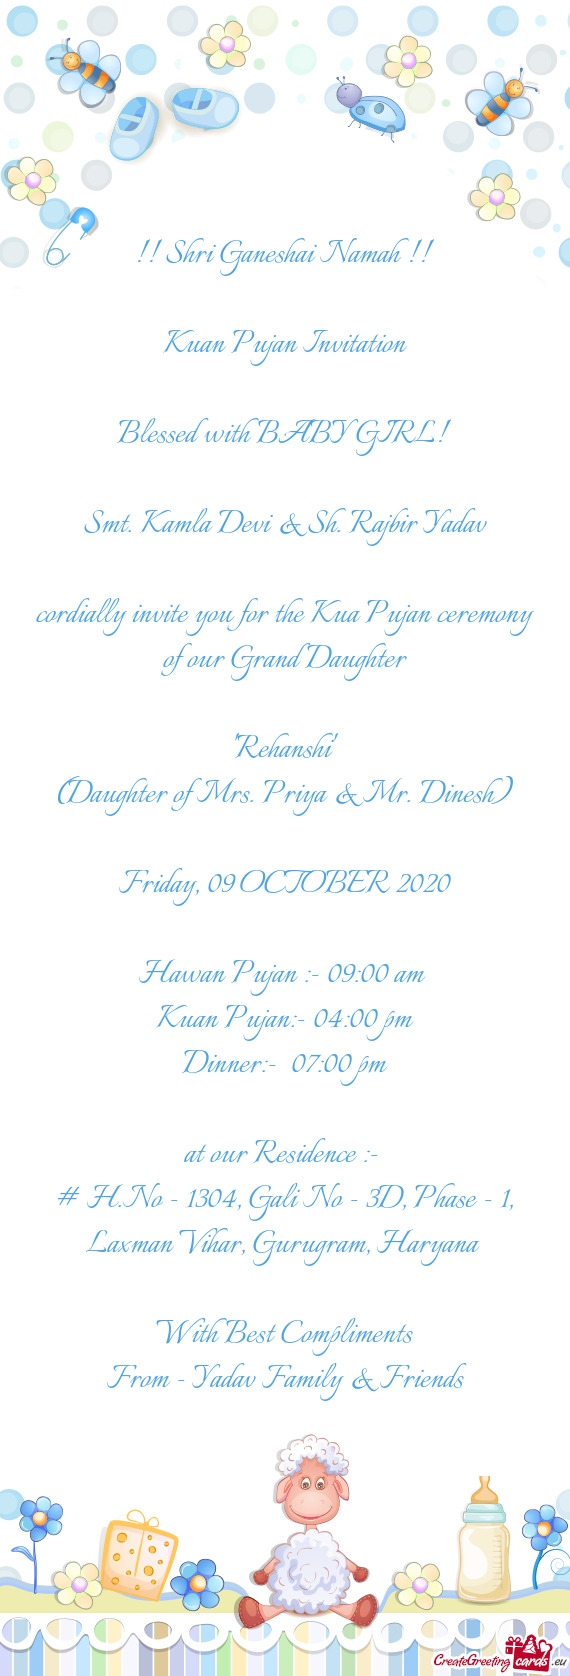 Cordially invite you for the Kua Pujan ceremony of our Grand Daughter